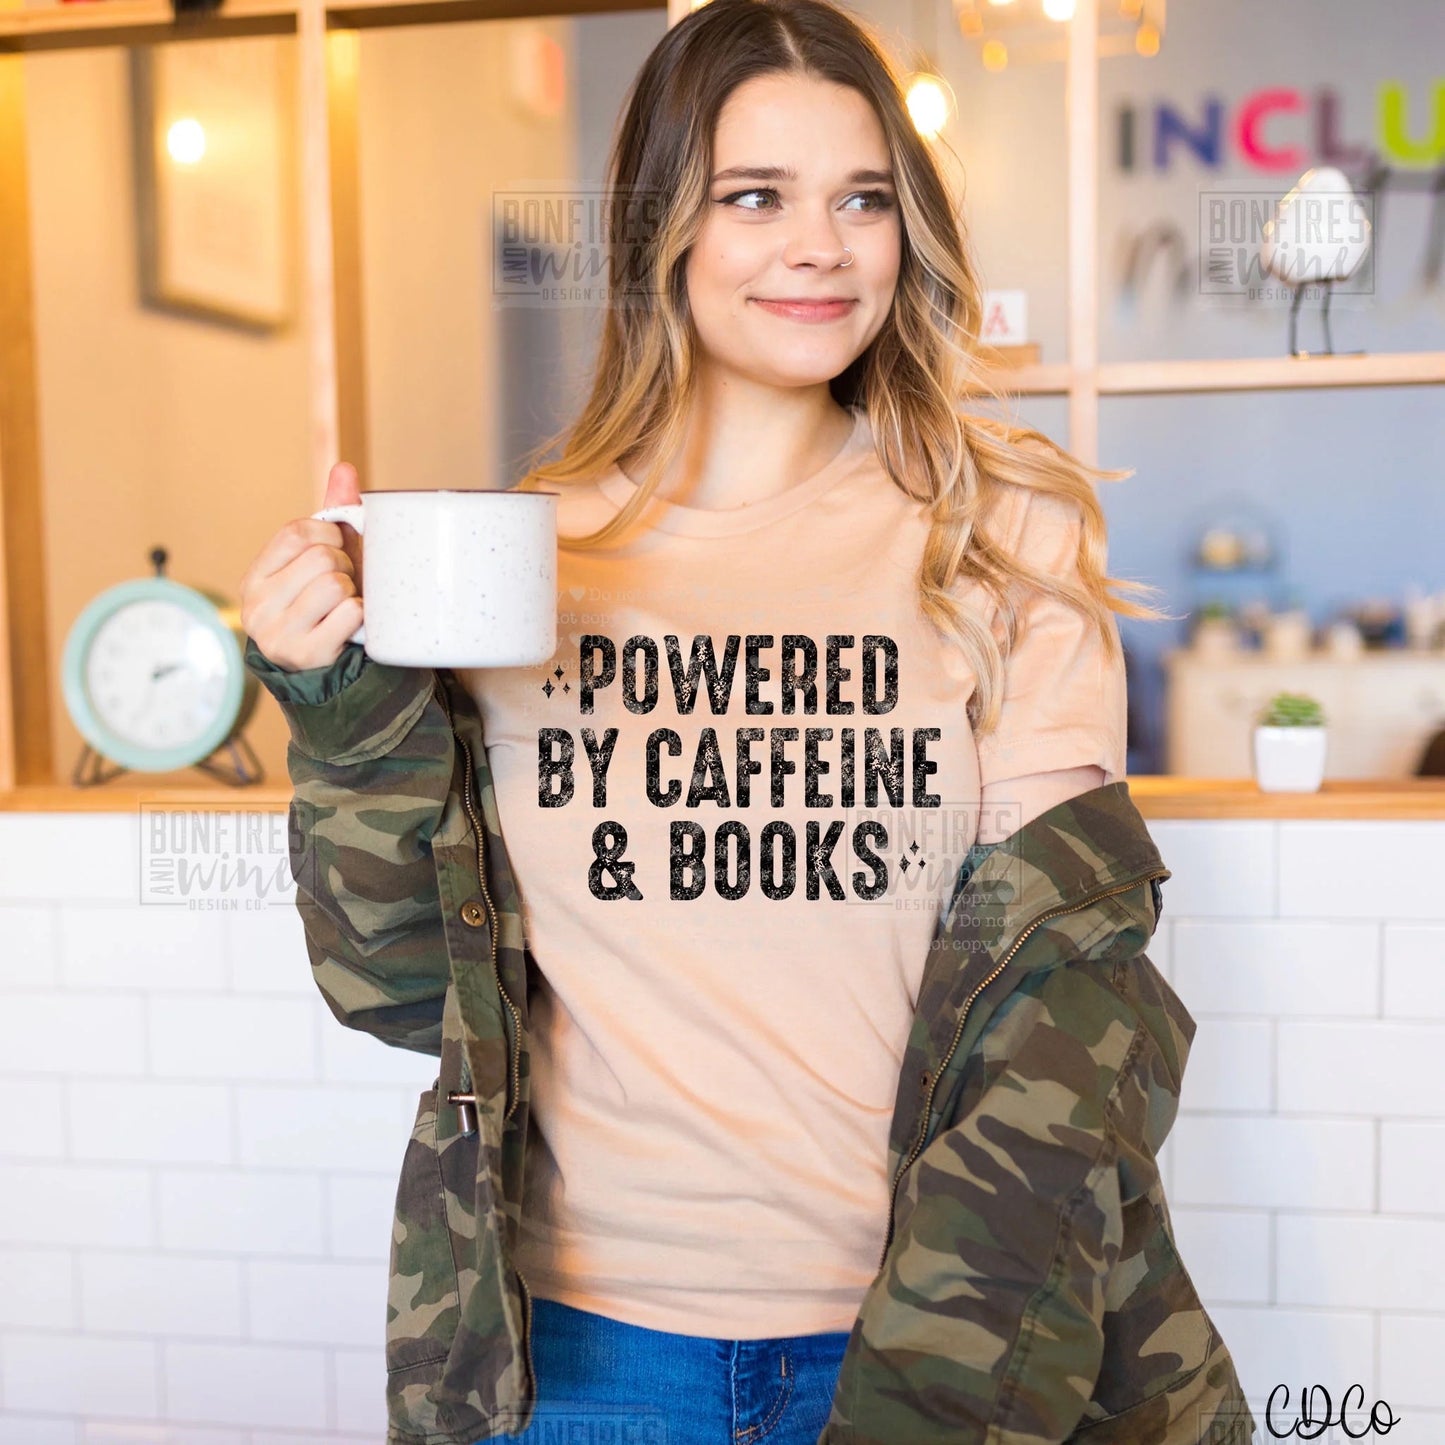 Powered by caffeine and books